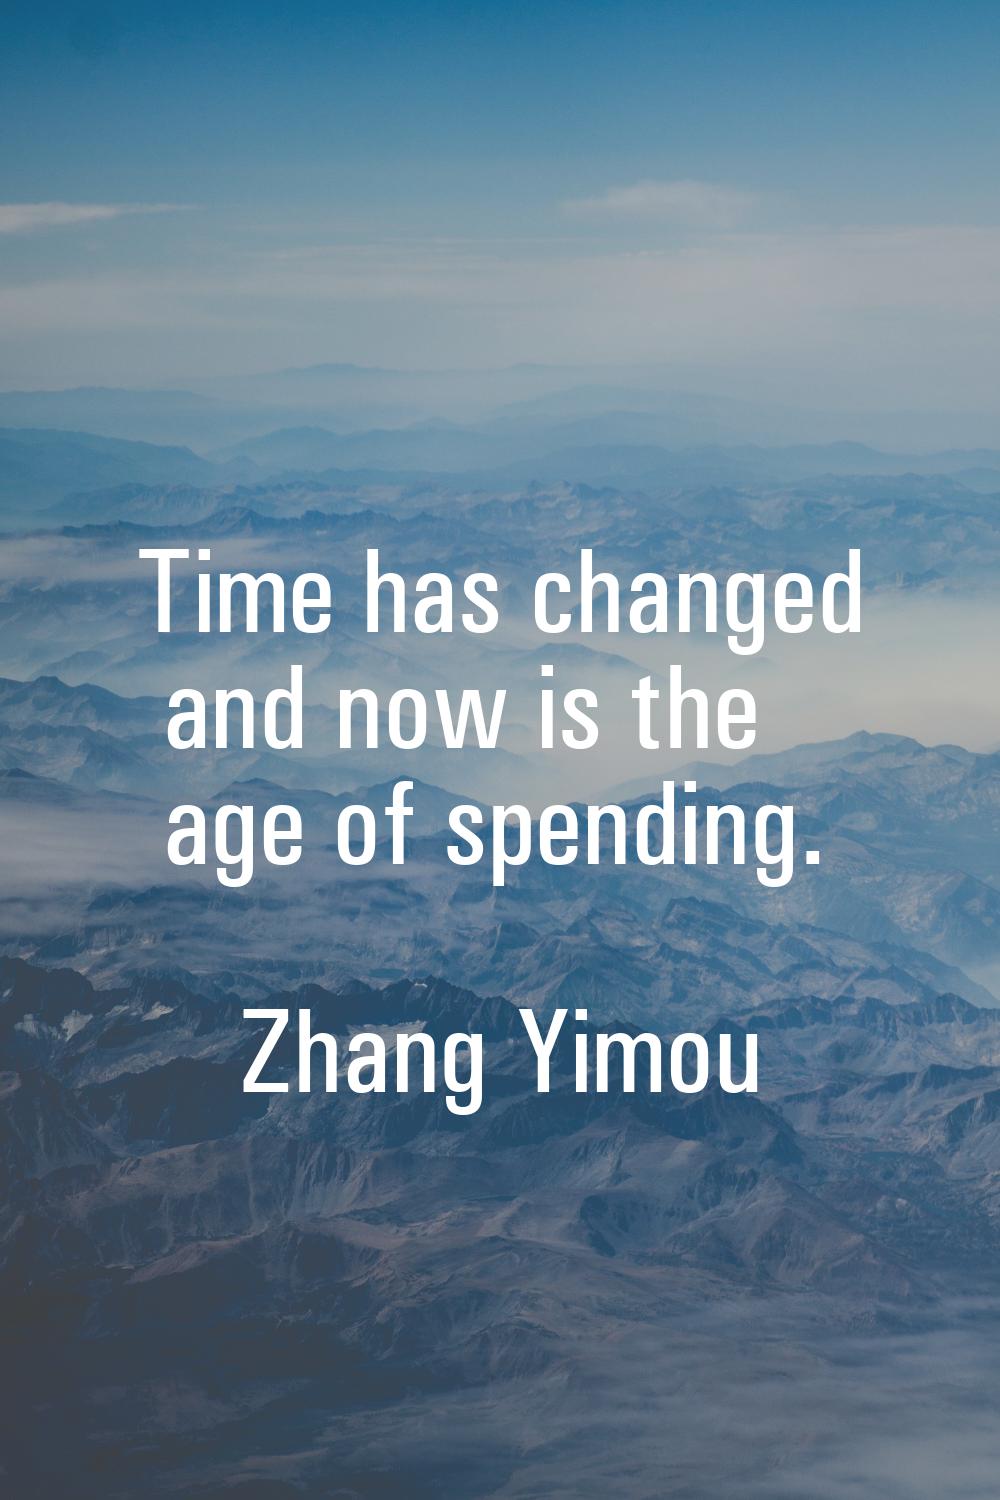 Time has changed and now is the age of spending.